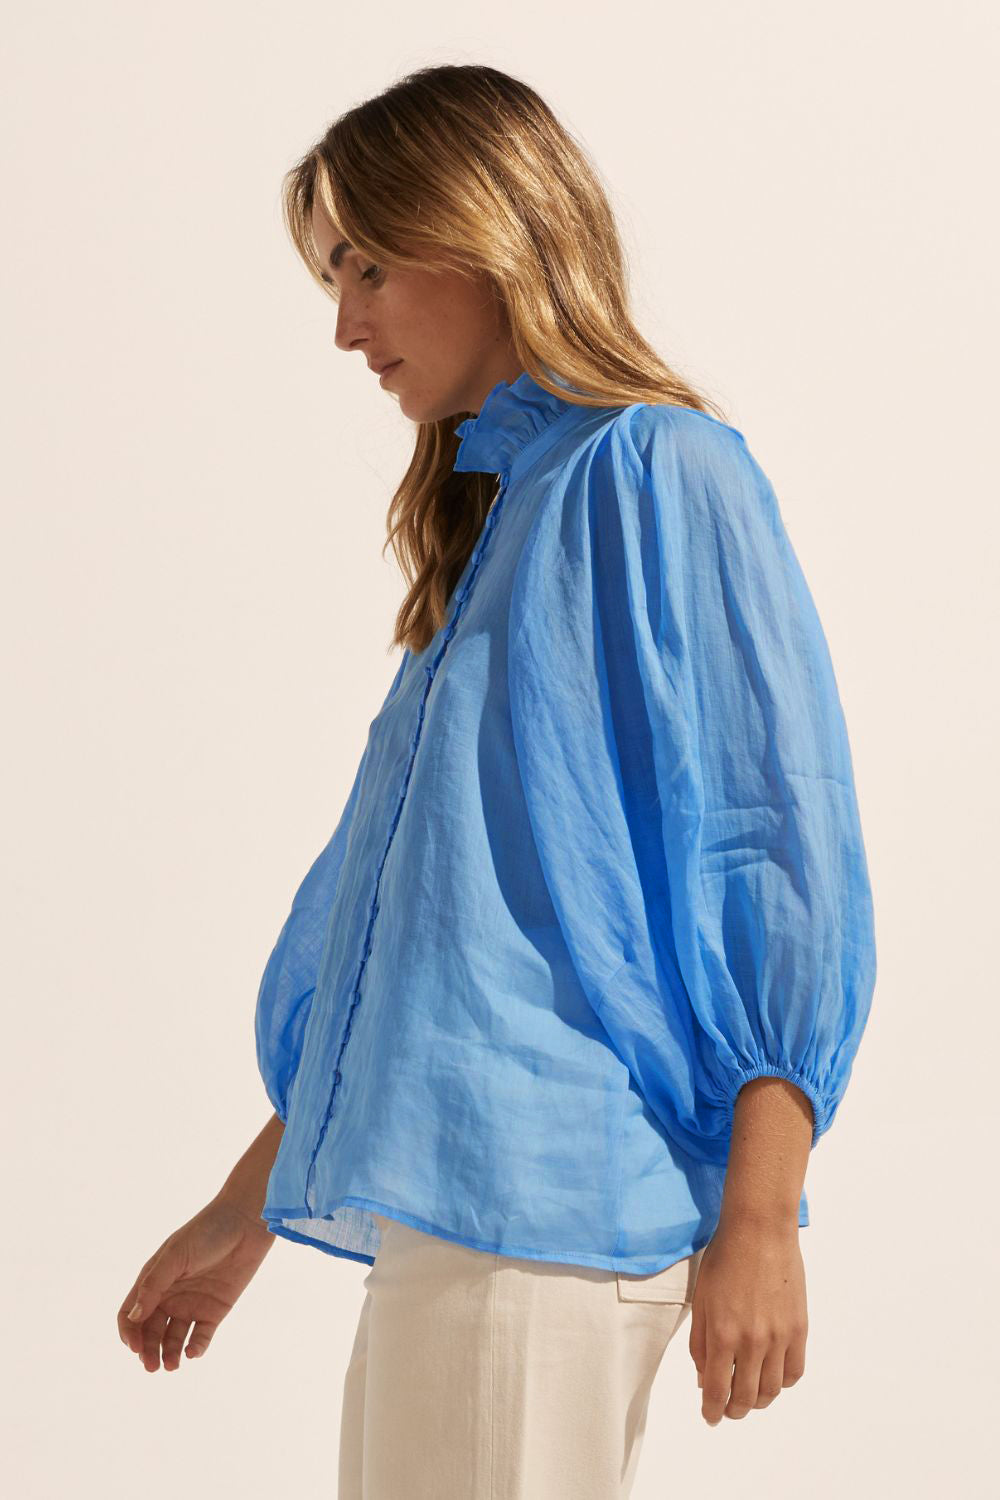 blue, ruffle neck collar, buttons down centre, mid length sleeve, shirt, side view